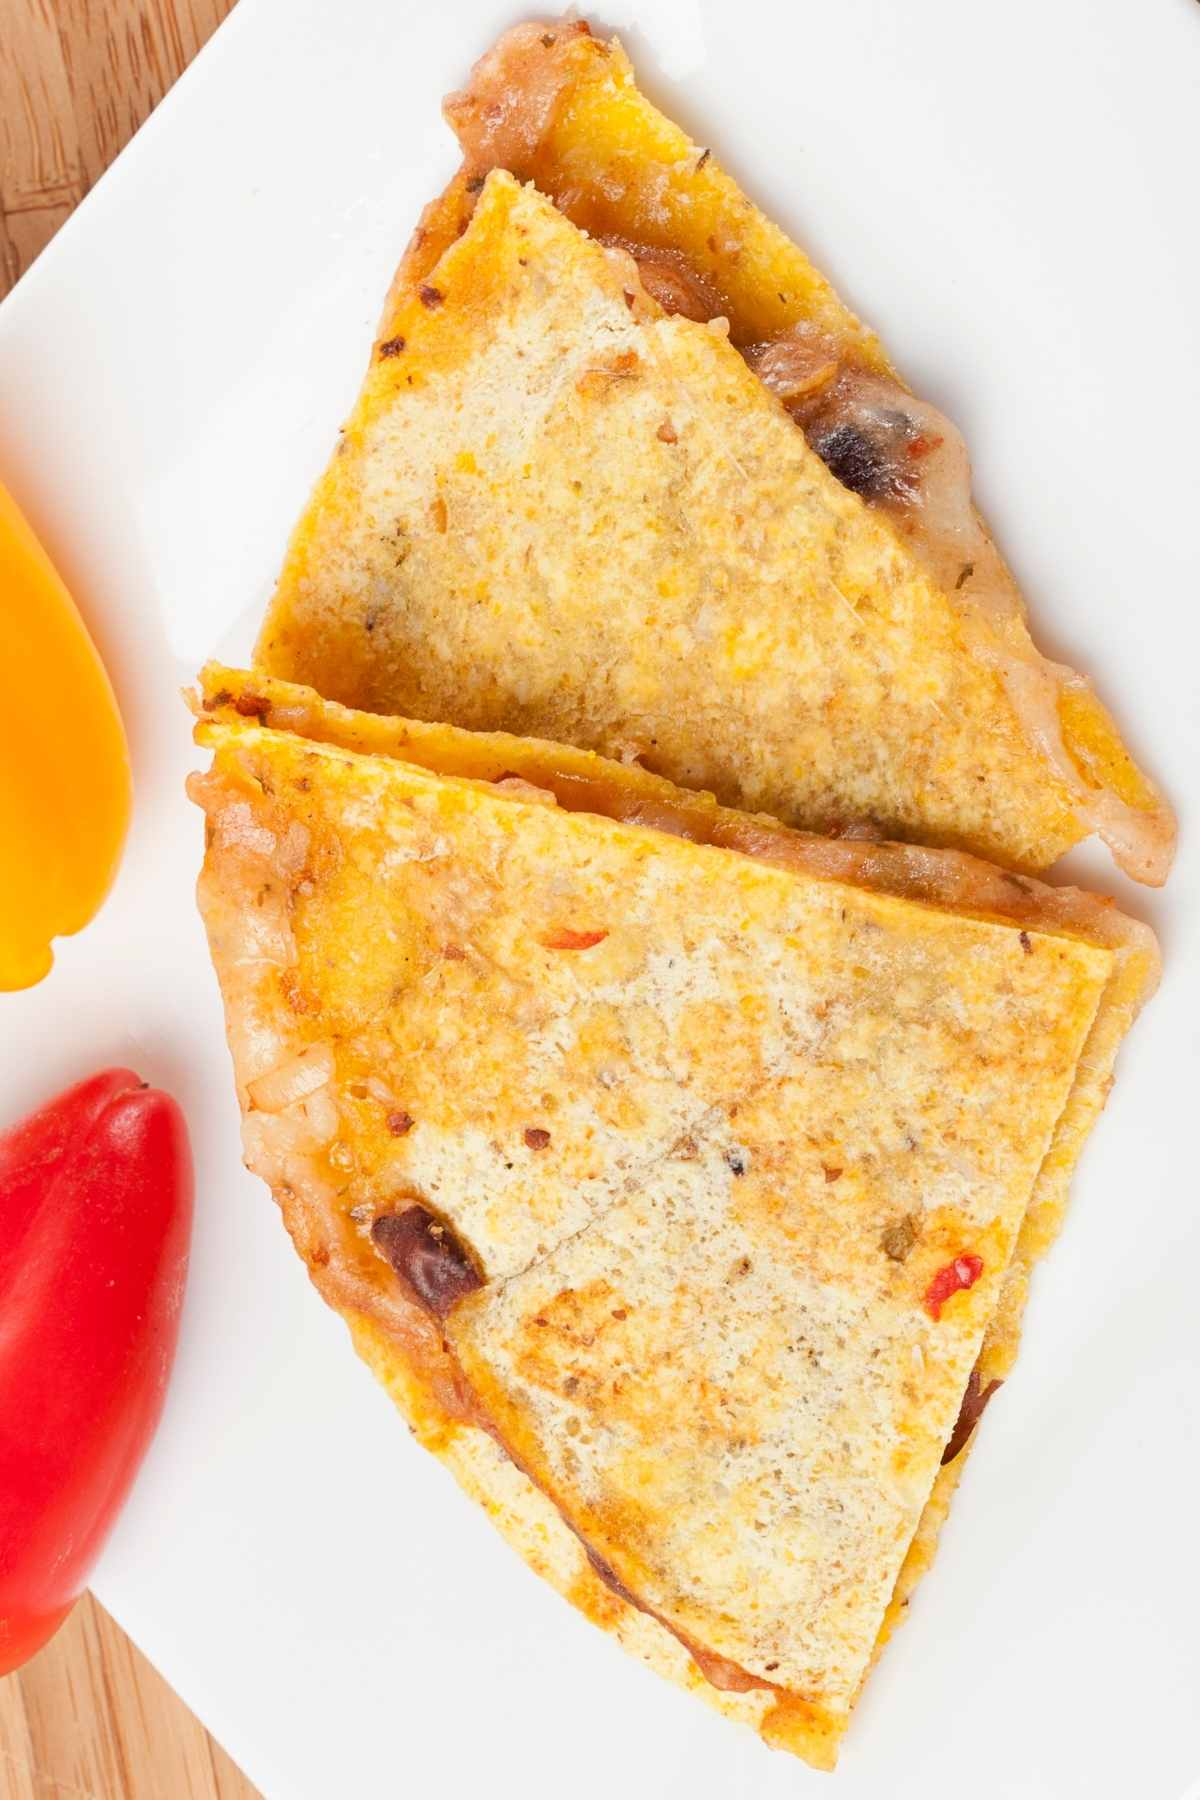 Crispy, crunchy and loaded with ooey gooey melted cheese, these Corn Tortilla Quesadillas are delicious and easy to make. Whether it’s the flavorful filling you’re after or the fact that these are ready in just 15 minutes, this recipe is always a hit!